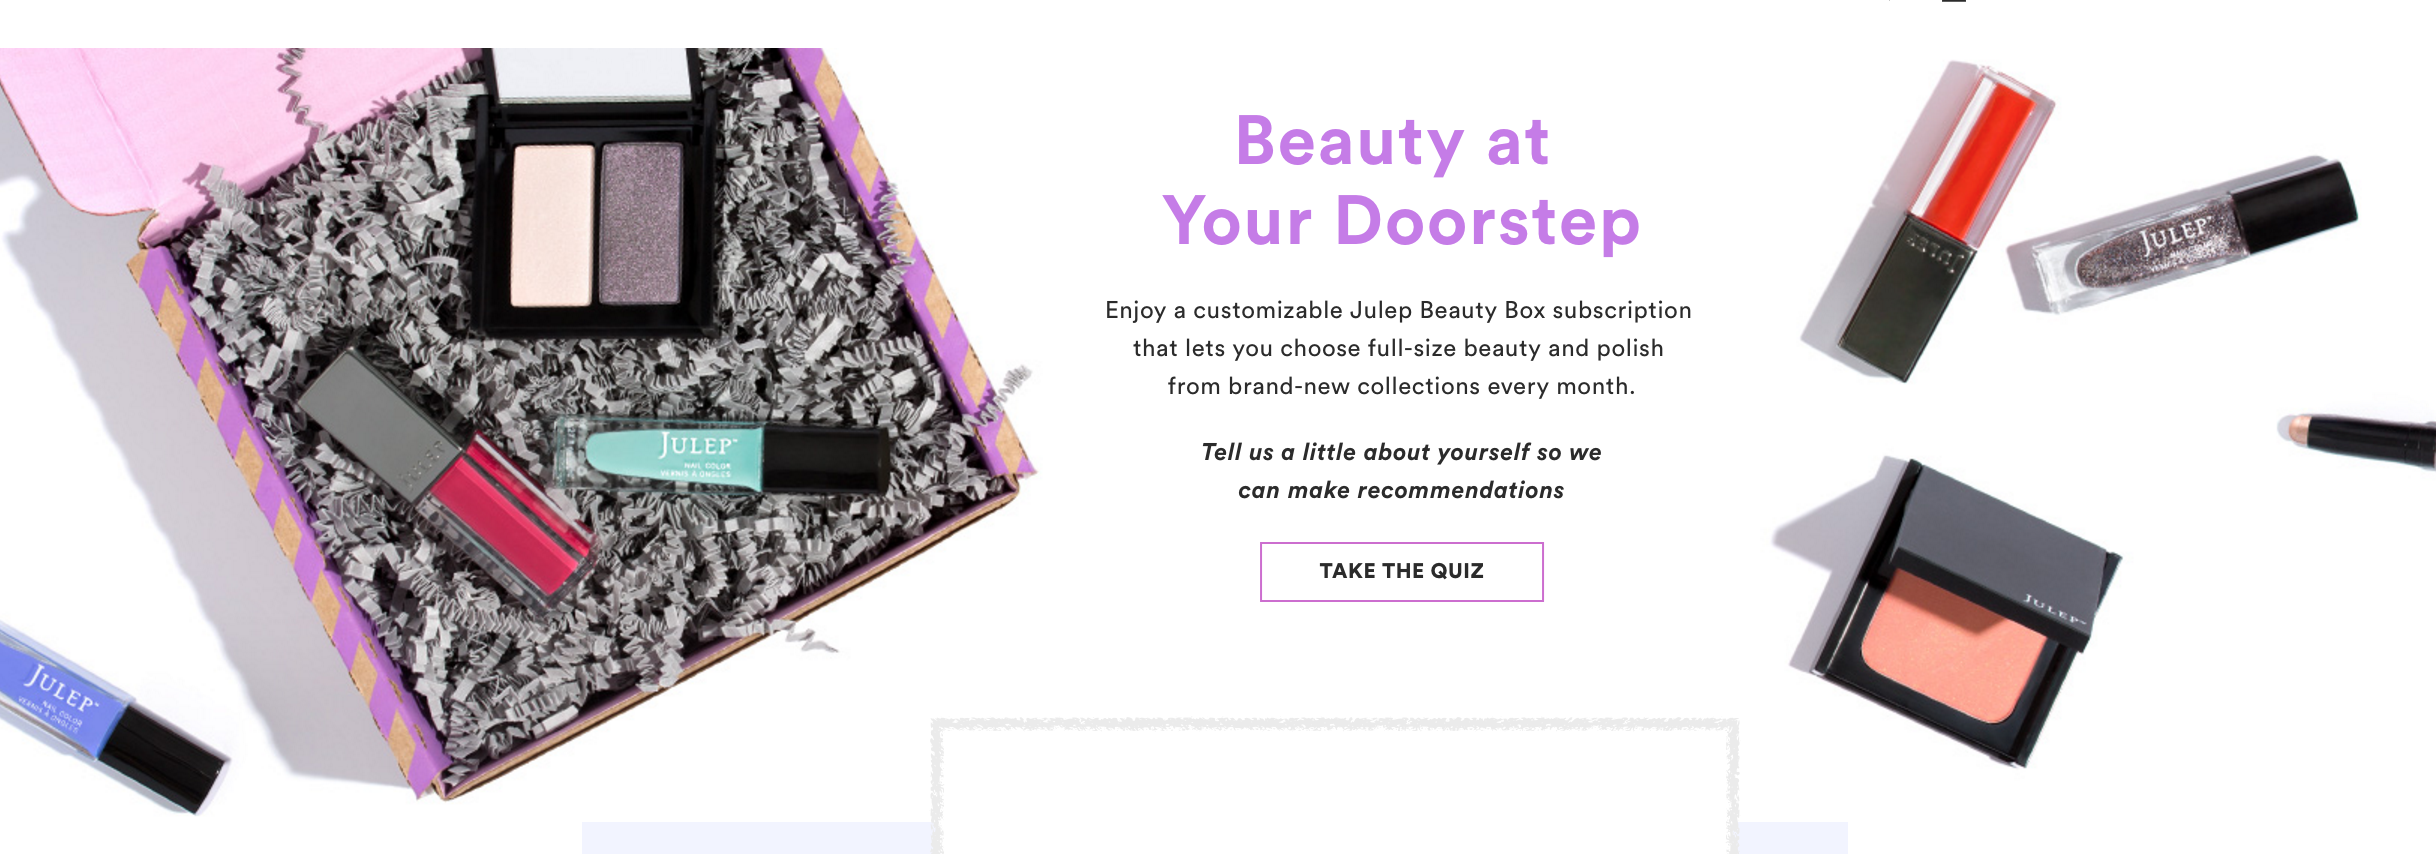 Beauty Box Julep Must Donate Toiletries To Settle Lawsuit Over Shady Negative-Option Marketing